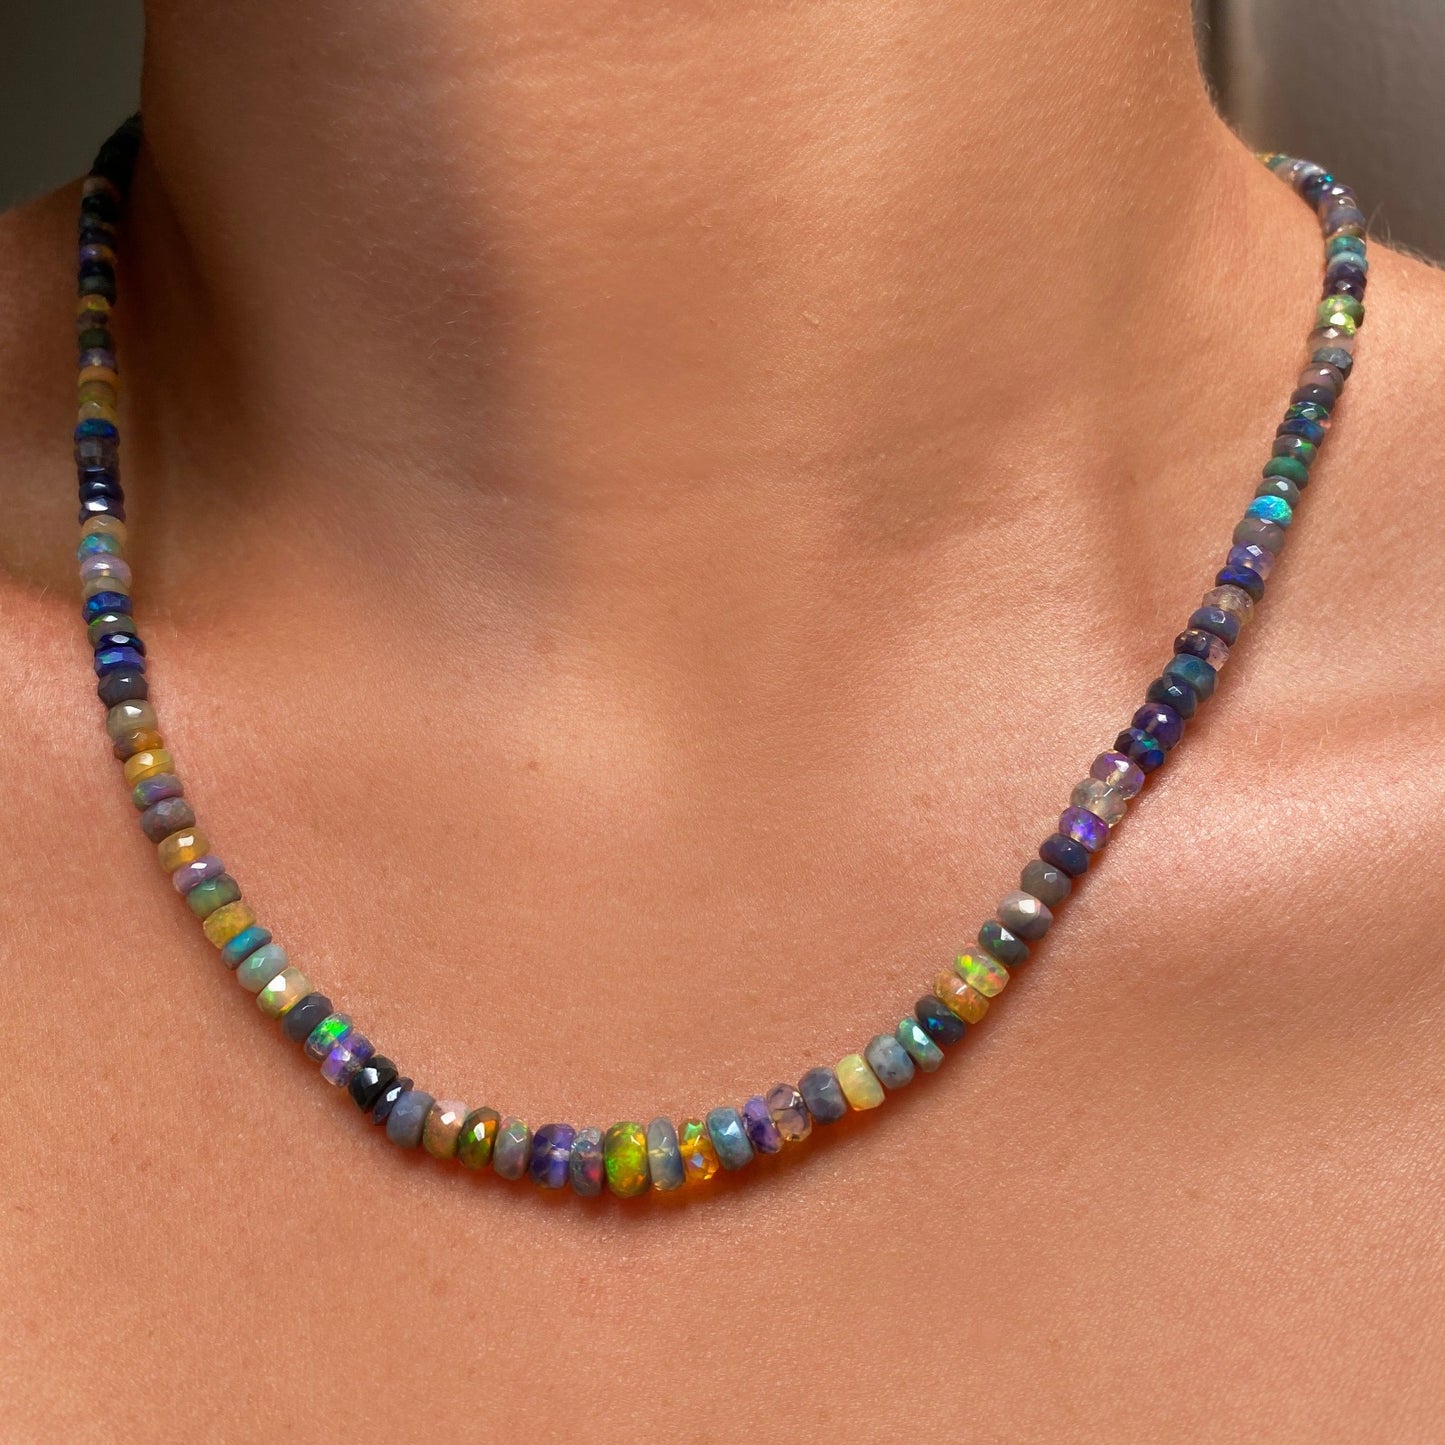 Shimmering beaded necklace made of faceted opals in shades of green, yellow, and blue on a gold linking ovals clasp.